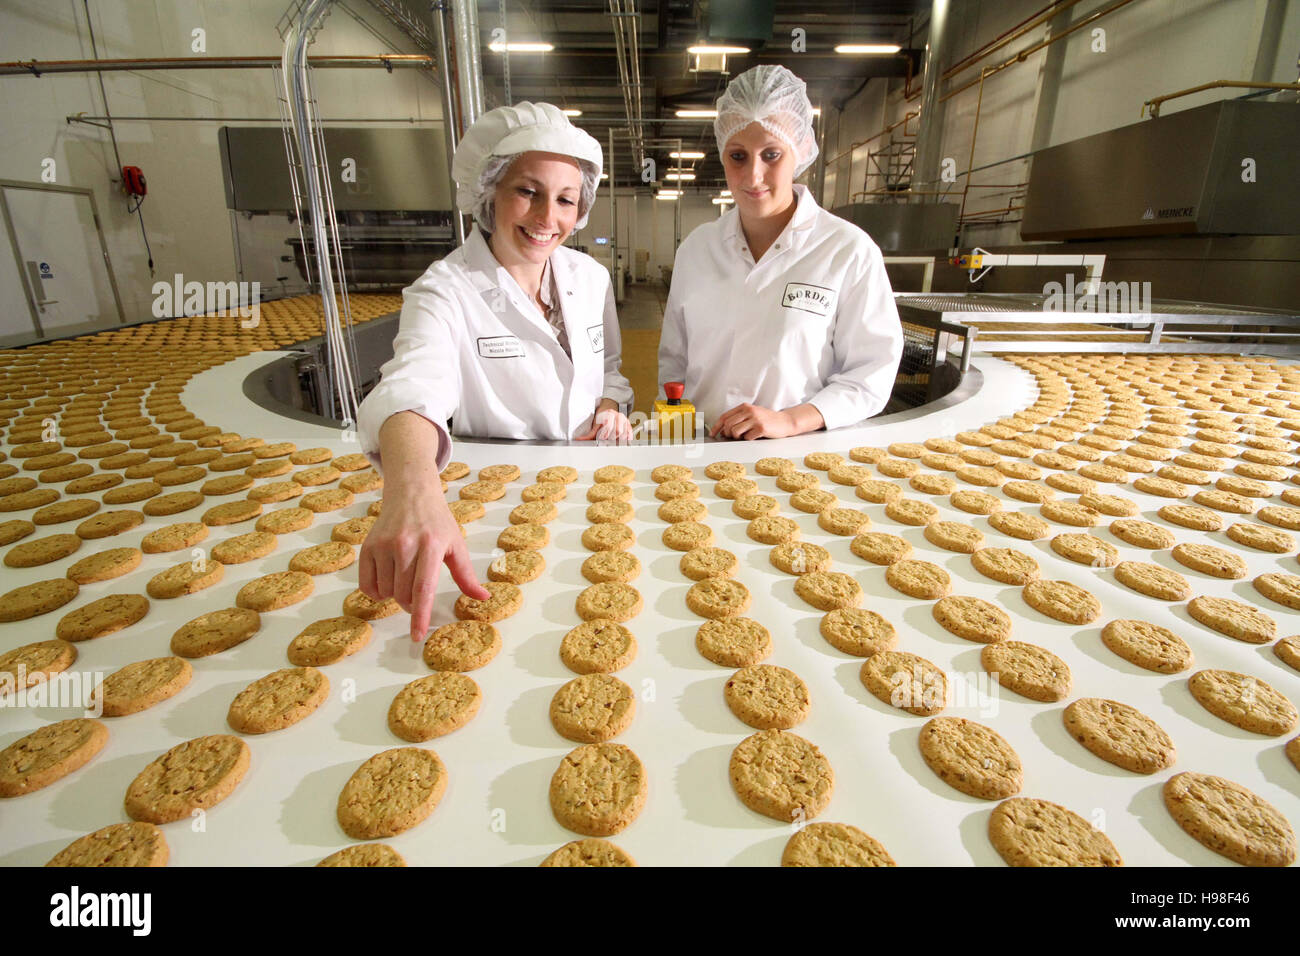 Production line with biscuits and factory workers Stock Photo